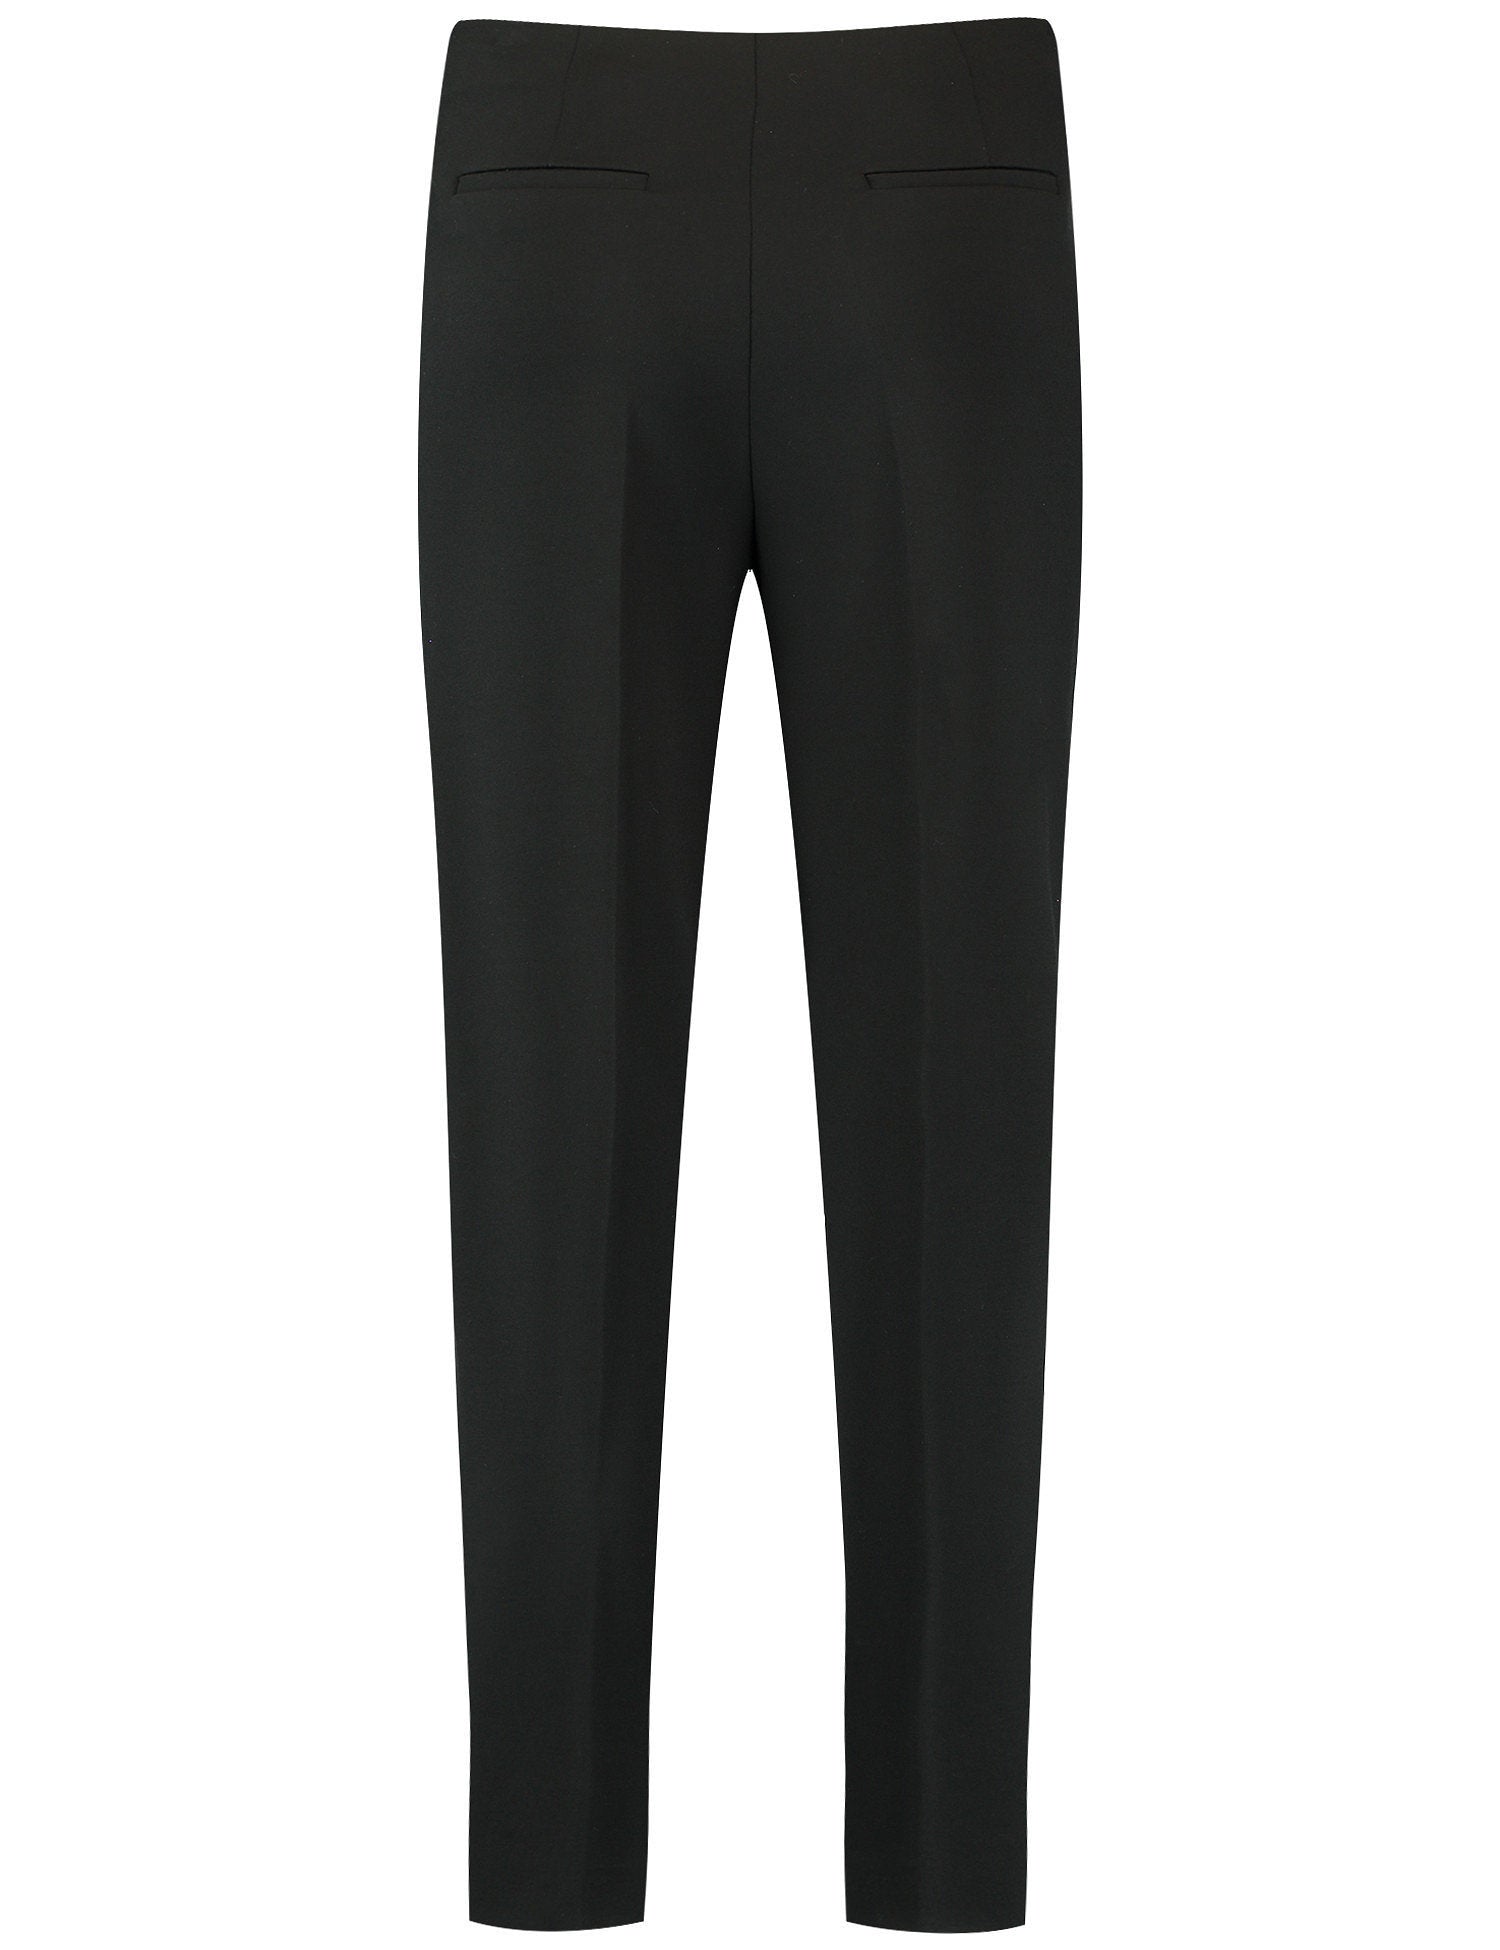 7/8-Length Stretch Trousers In A Slim Fit_420415-11257_1100_03